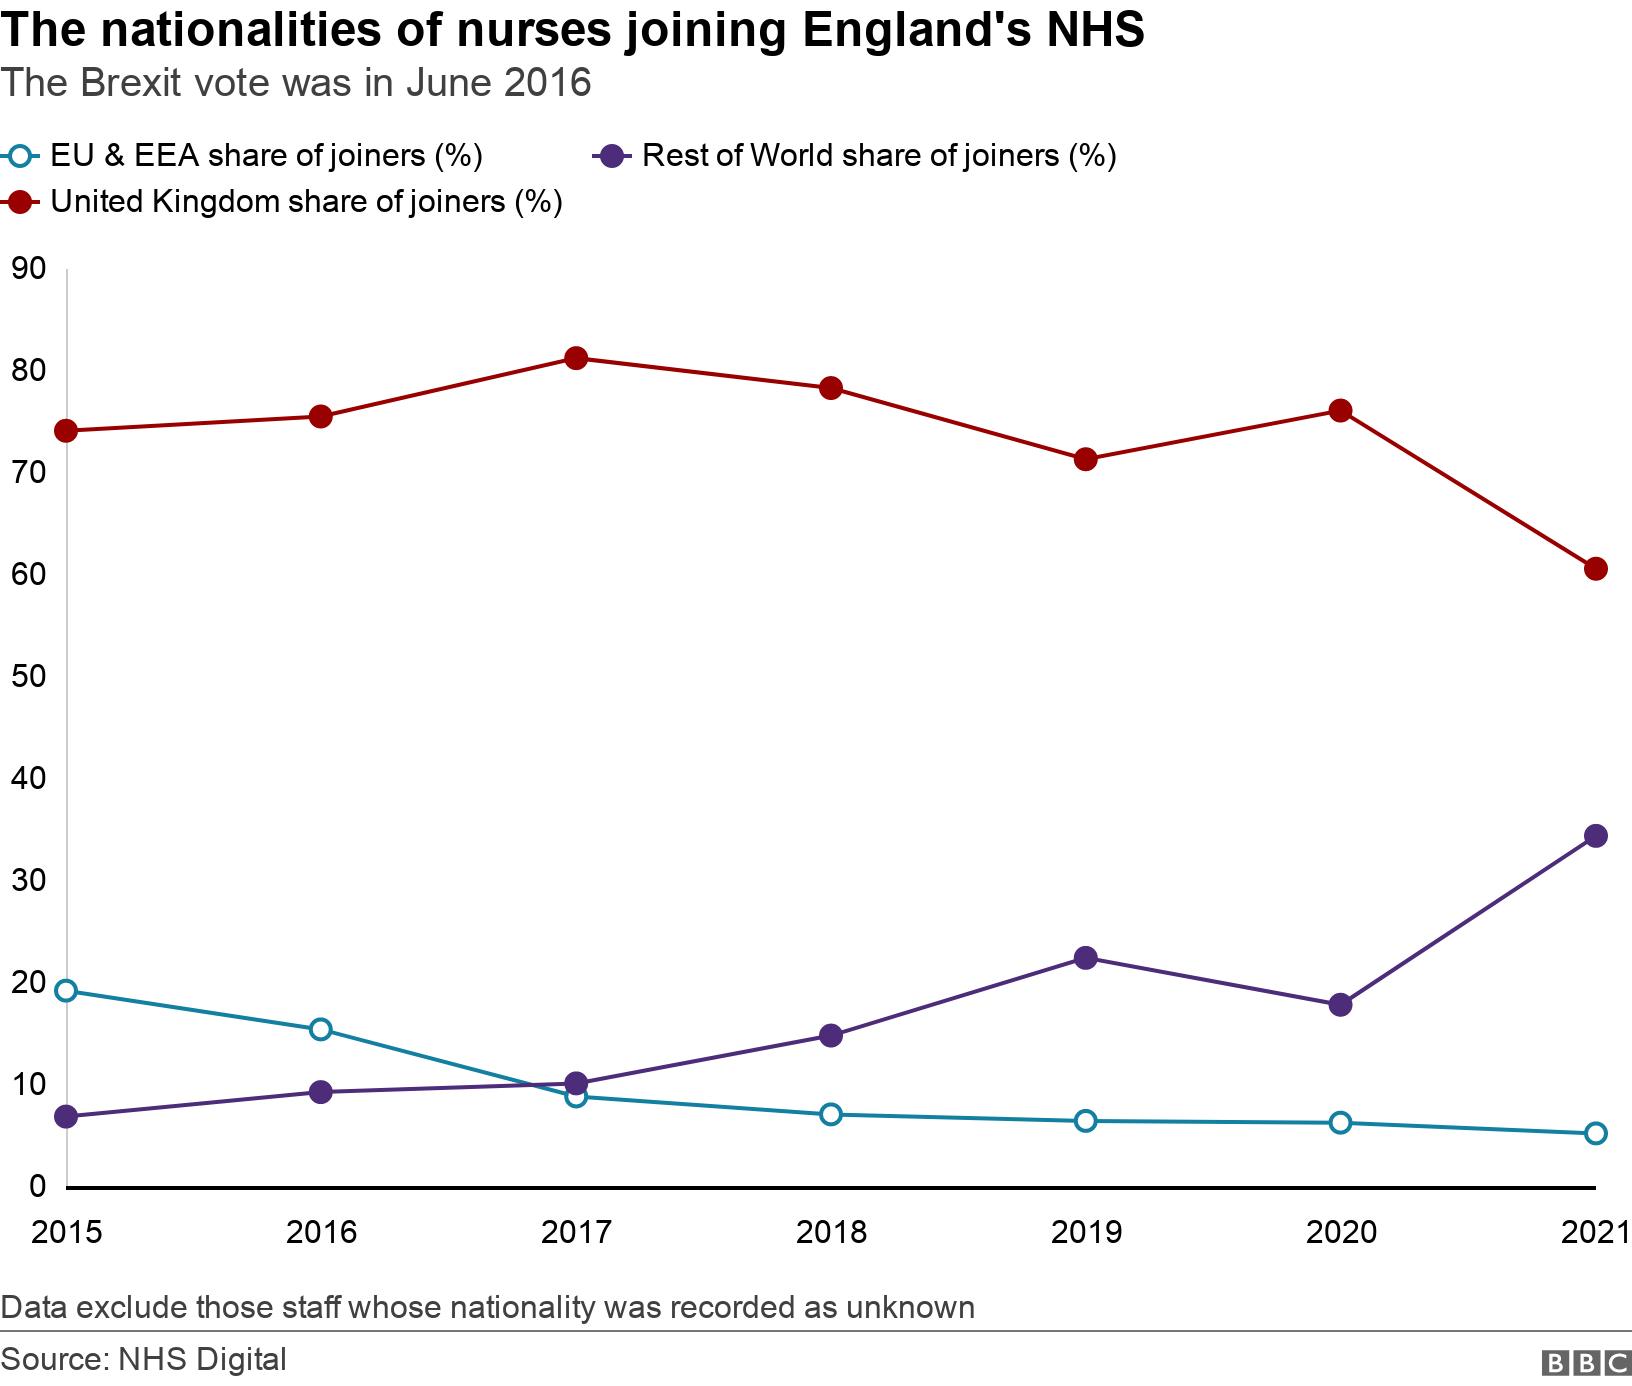 The nationalities of nurses joining England's NHS. The Brexit vote was in June 2016. A line chart showing a percentage breakdown by nationality of the nurses joining England's NHS in each of the calendar years 2015-2021 inclusive Data exclude those staff whose nationality was recorded as unknown.